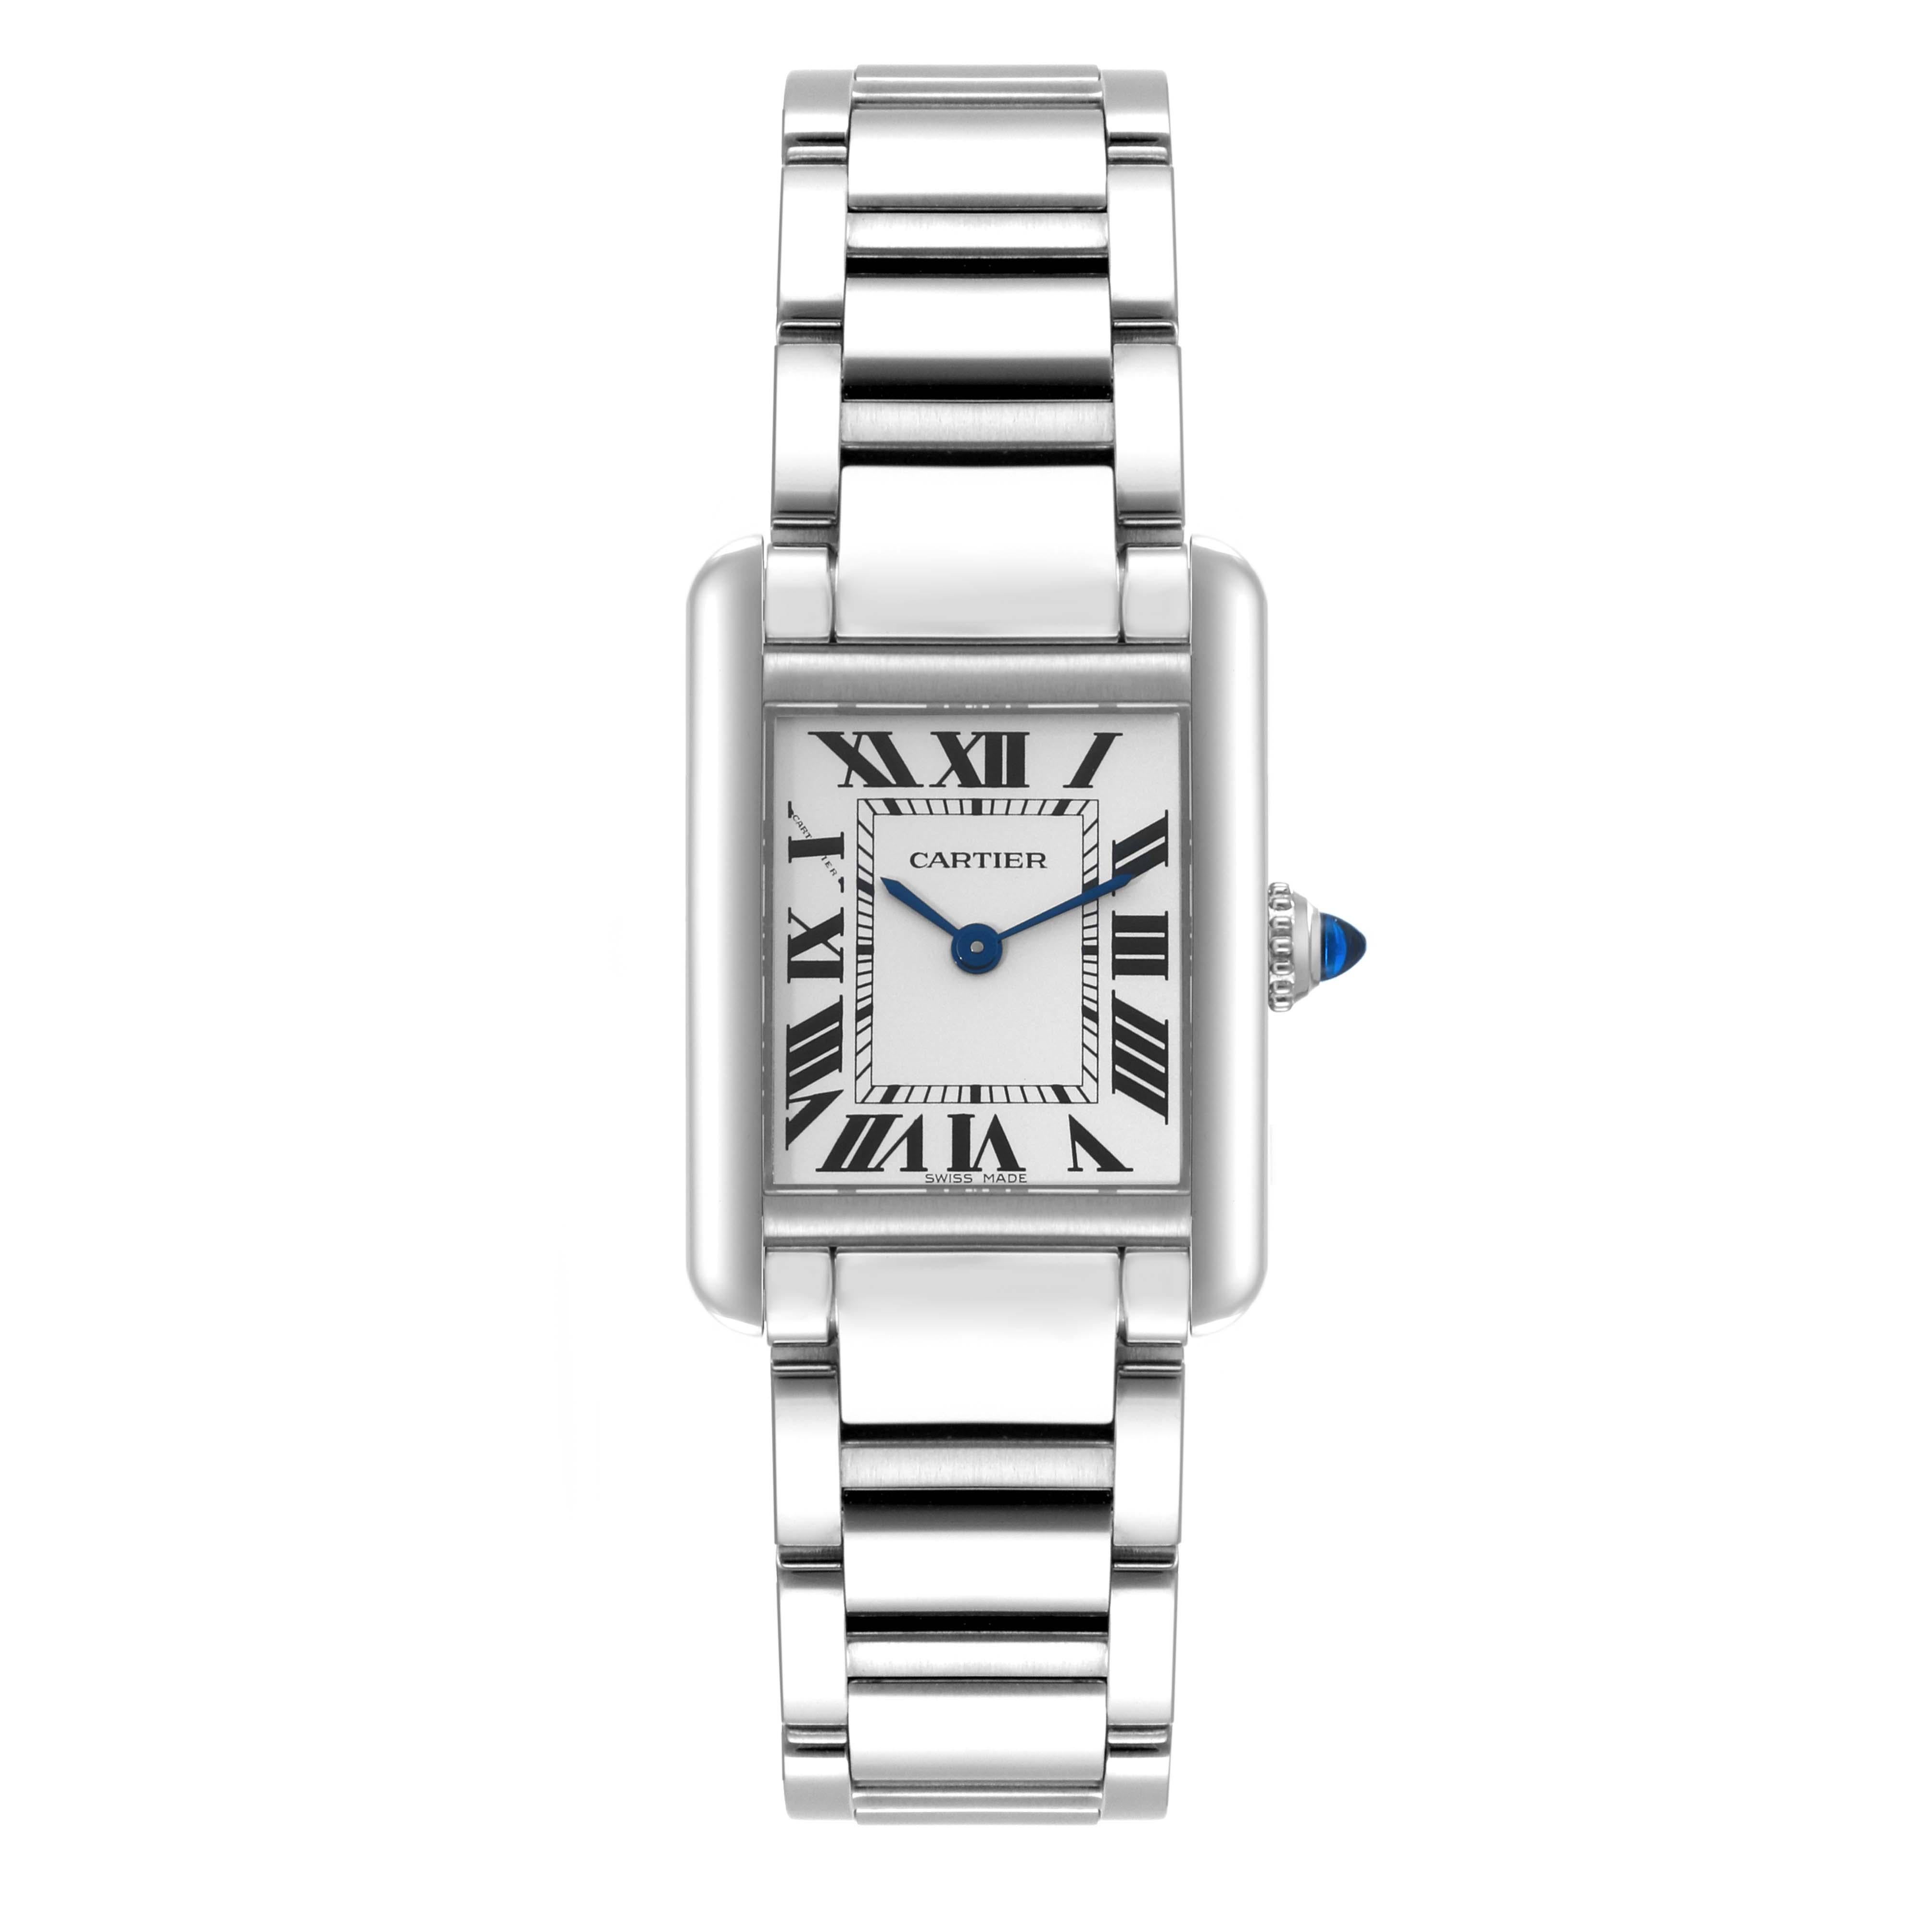 Cartier Tank Must Small Steel Silver Dial Ladies Watch WSTA0051. Quartz movement. Stainless steel case 29.5 x 22 mm. Circular grained crown set with the blue spinel cabochon. . Scratch resistant sapphire crystal. Silver dial with black Roman numeral